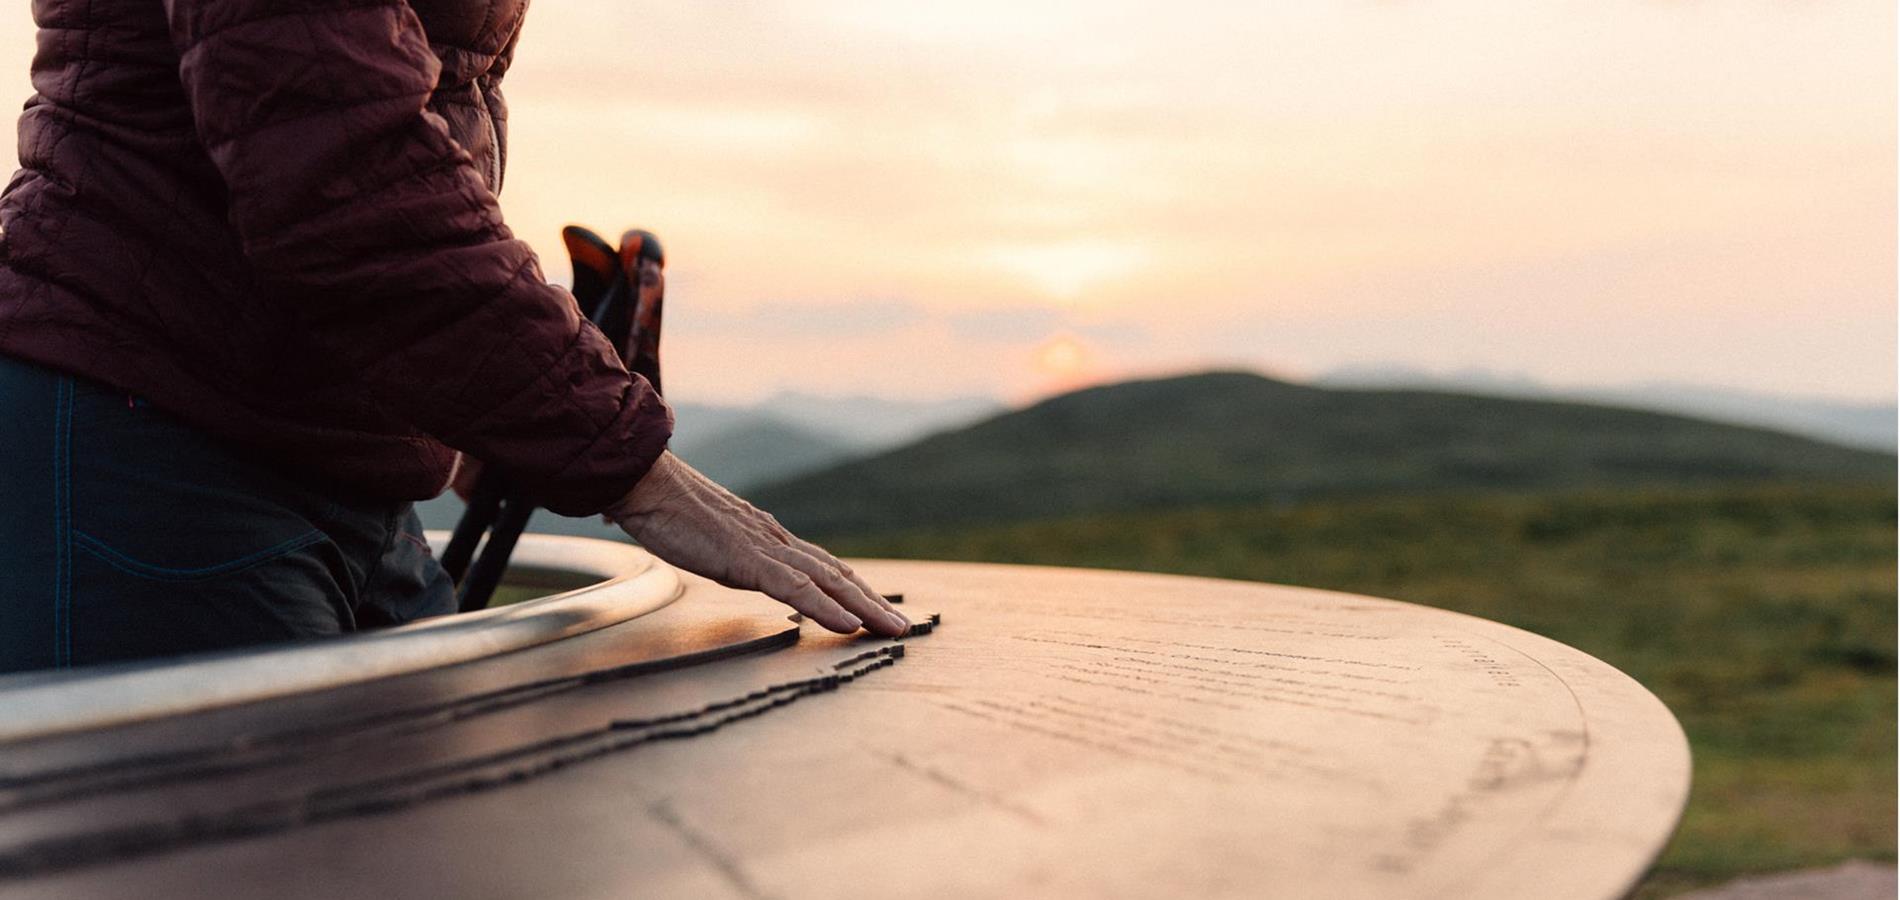 Sunrise at the Kreuzjoch viewing platform. A woman gives her hand to the viewing plate, which is made of rusty iron and shows the mountains surrounding Merano and the Dolomites.